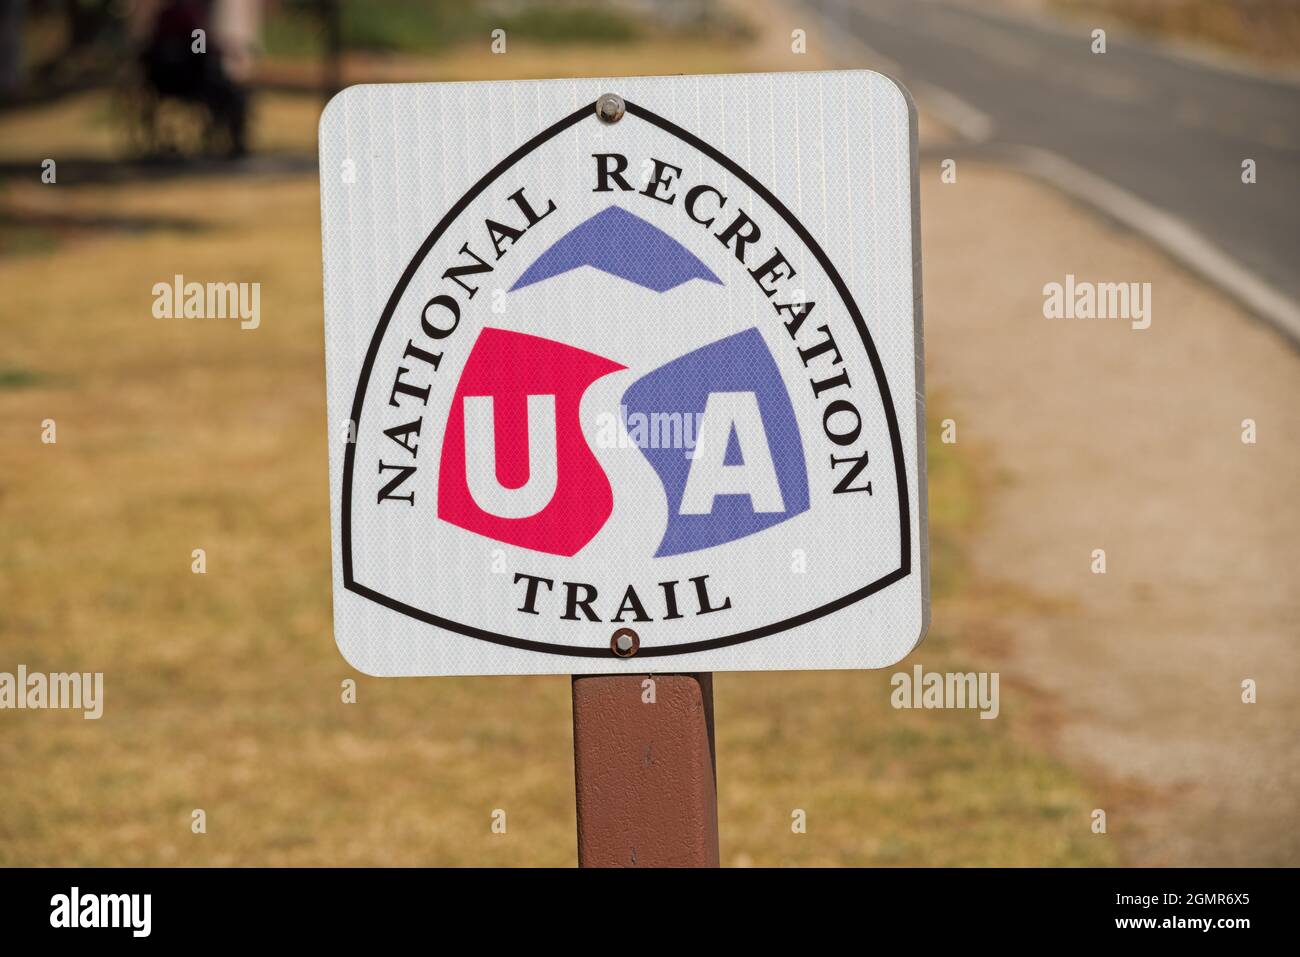 National Recreation Trail sign along a paved bike path Stock Photo